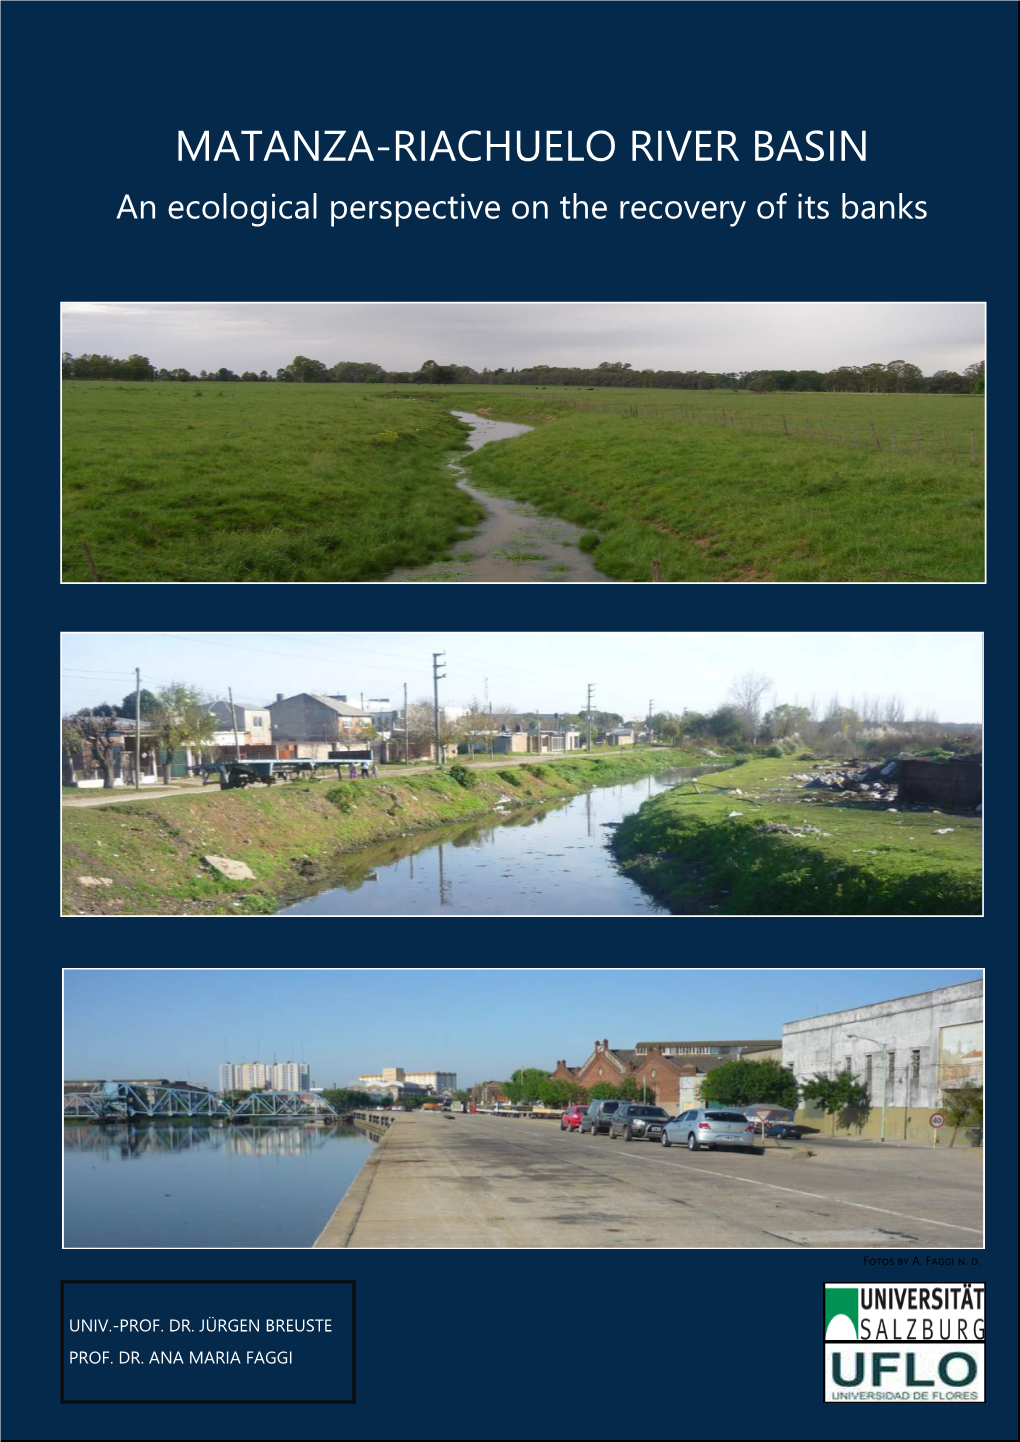 MATANZA-RIACHUELO RIVER BASIN an Ecological Perspective on the Recovery of Its Banks